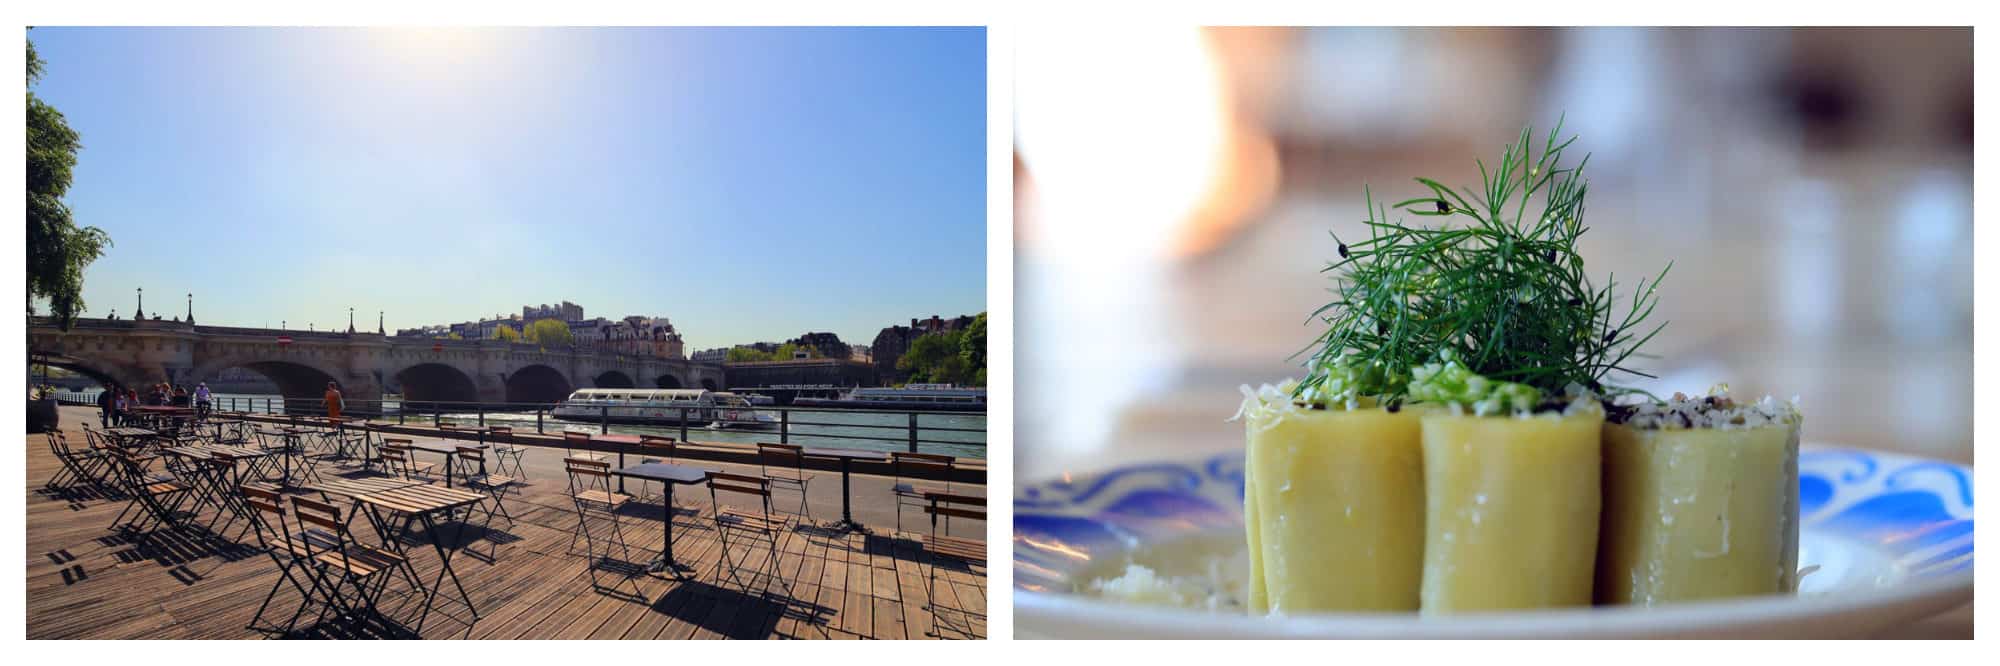 Maison Maison terrace in Paris is a top spot for drinks on the River Seine (left) as well as healthy snacks like these quinoa rolls (right).